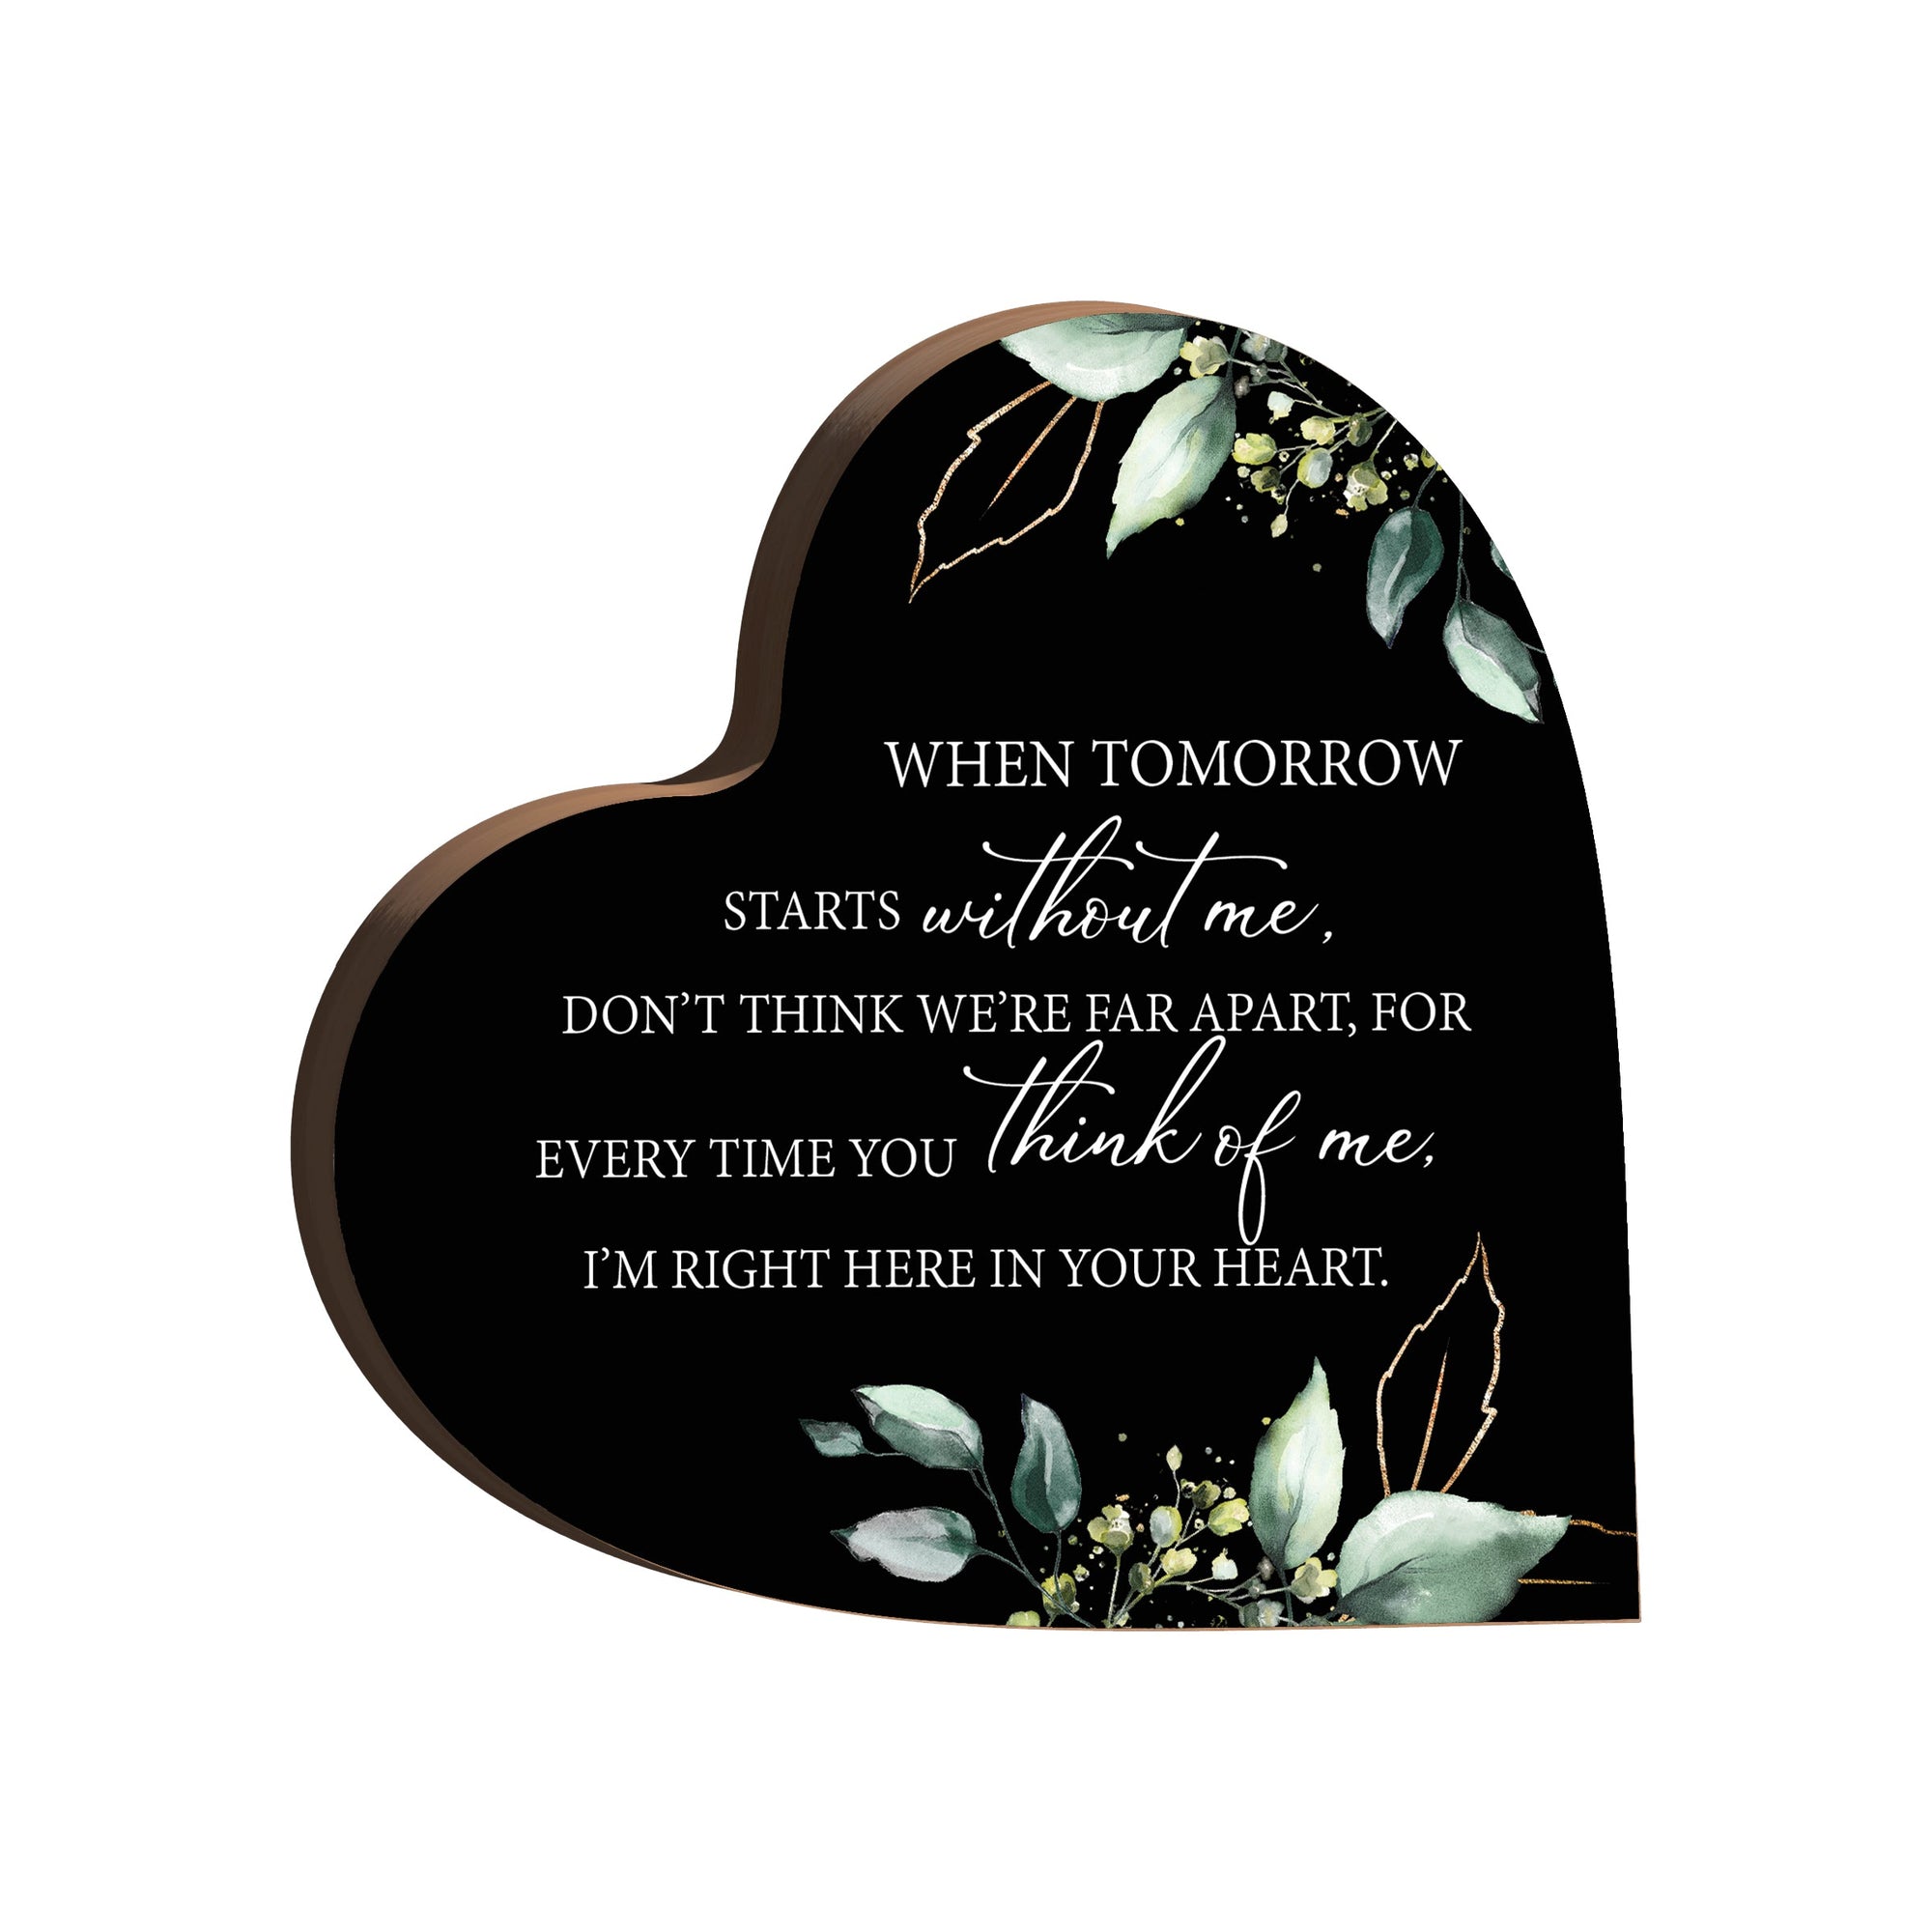 Elegant memorial decorations - Wooden heart block sign to commemorate loved ones.